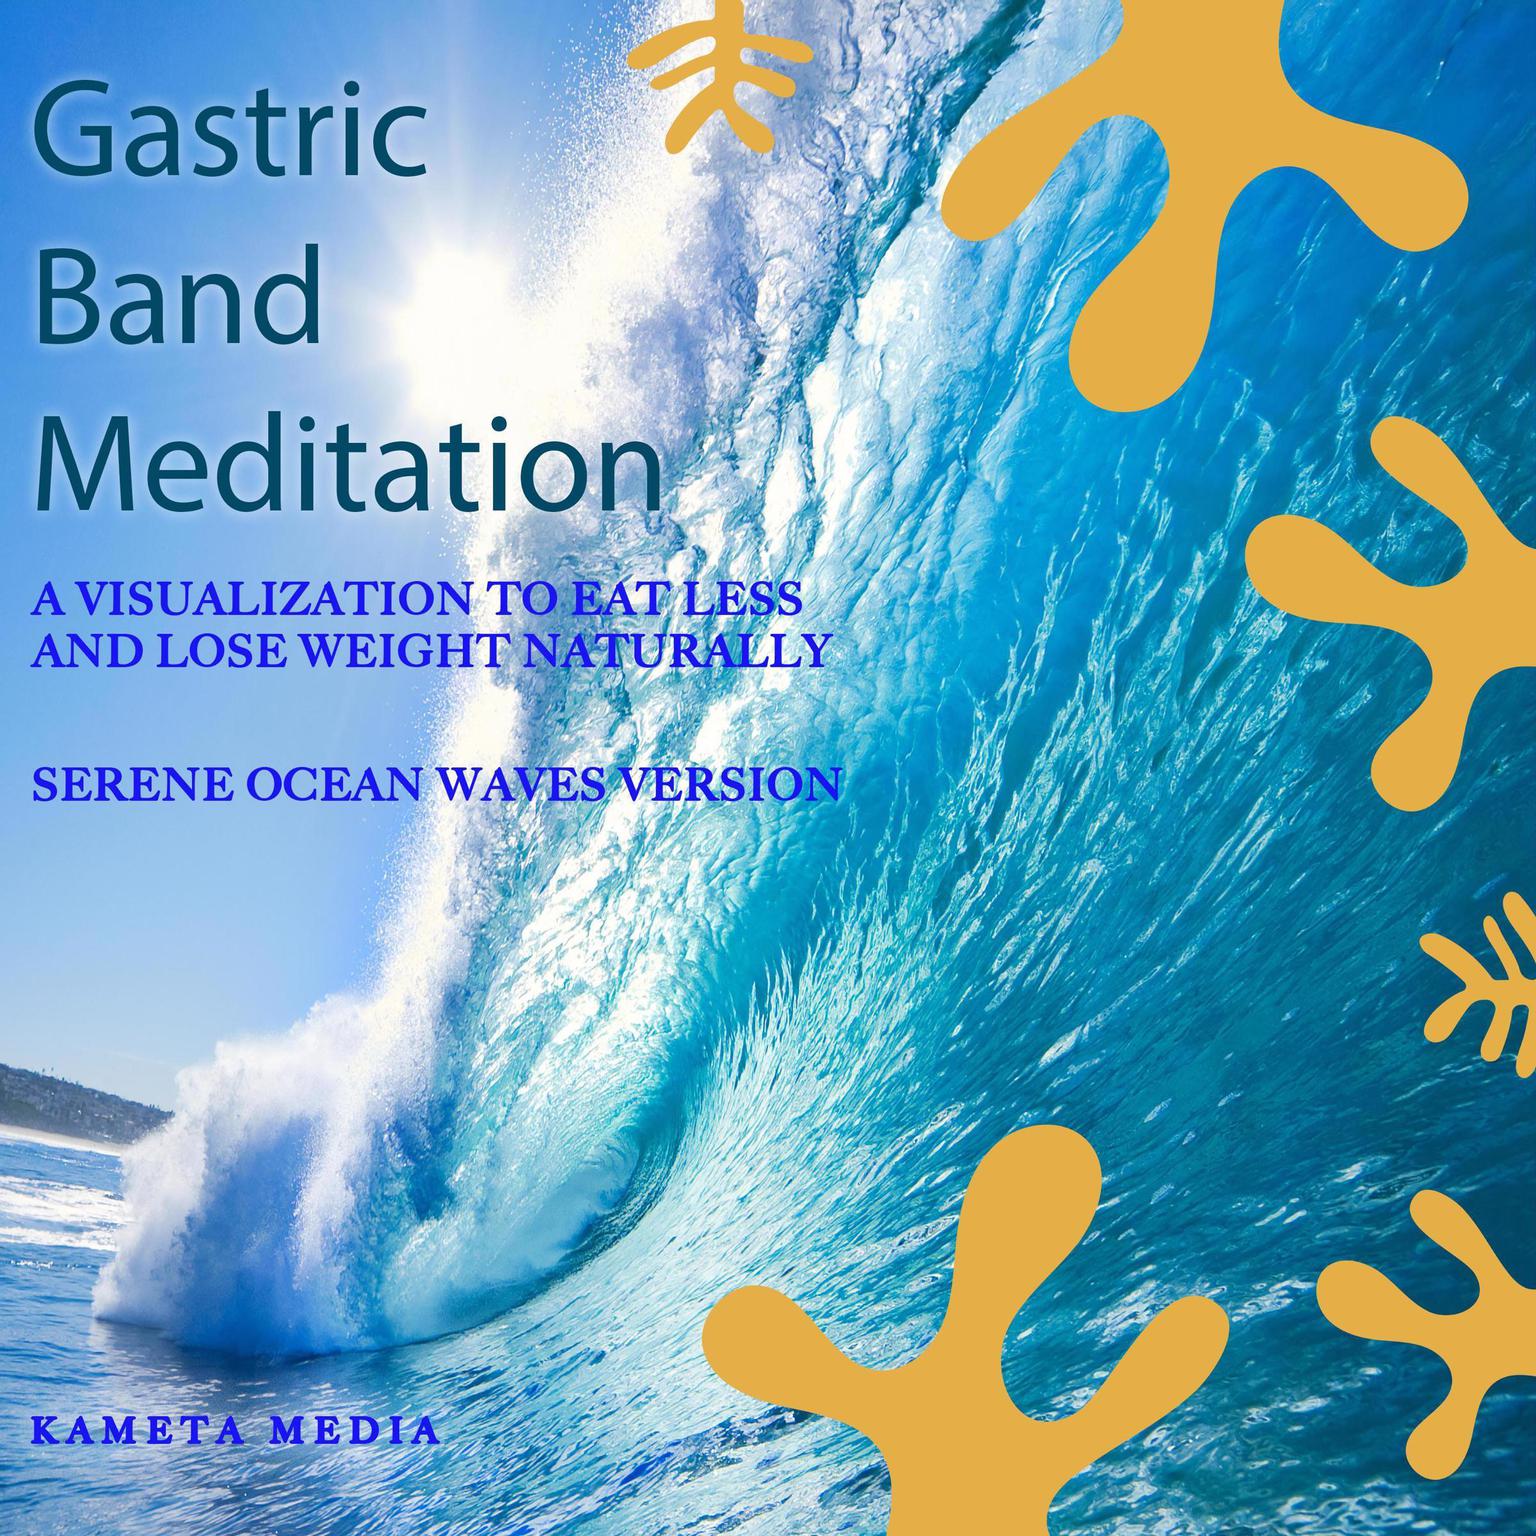 Gastric Band Meditation: A Visualization to Eat Less and Lose Weight Naturally (Serene Ocean Waves Version) Audiobook, by Kameta Media